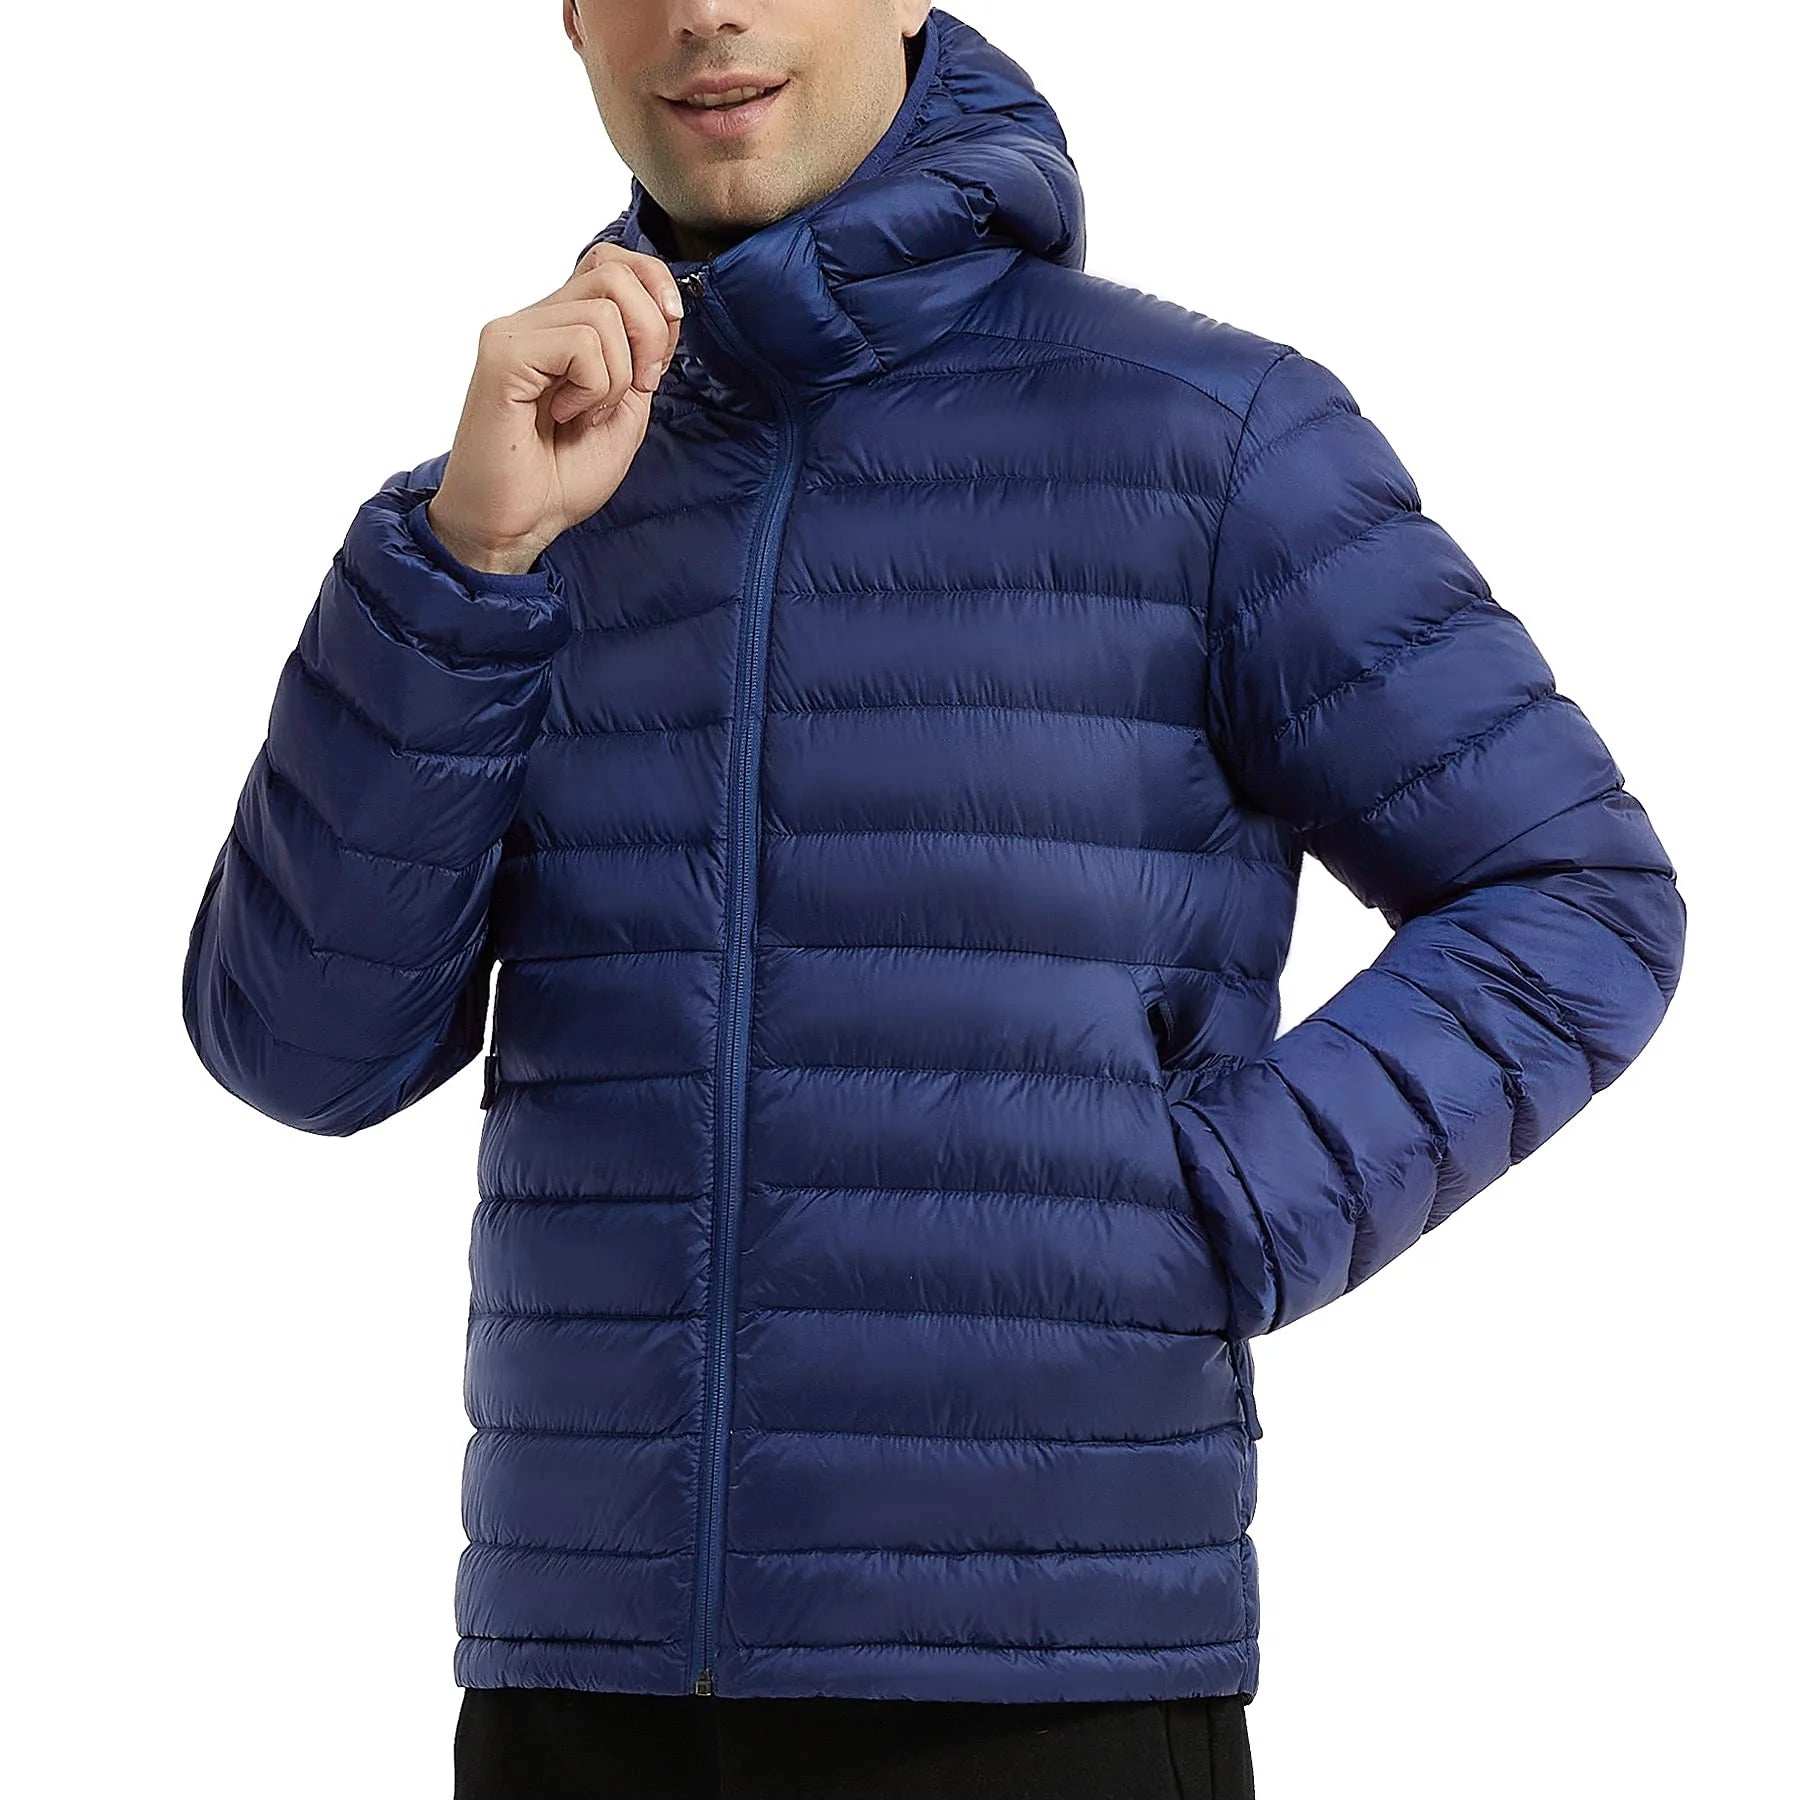 In the realm of men's outerwear, lightweight down jacket men's as versatile staples that offer warmth, comfort,